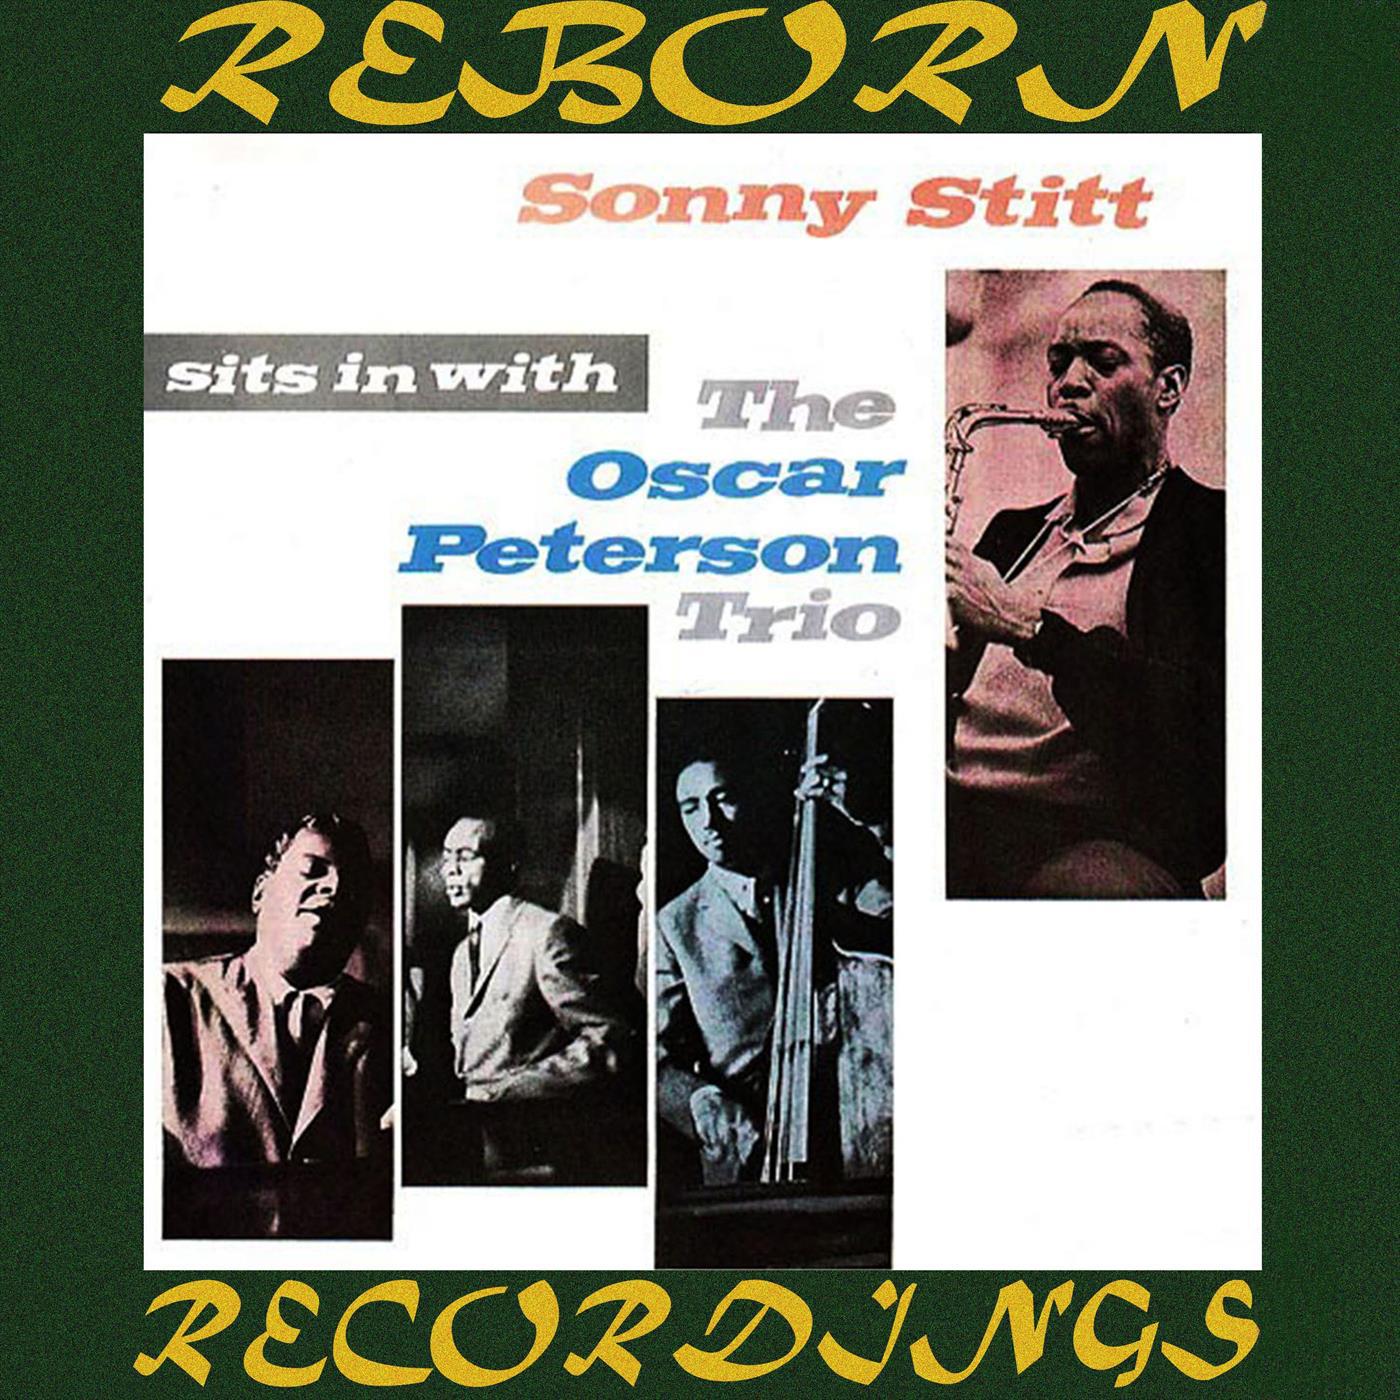 Sits In With The Oscar Peterson Trio (HD Remastered)